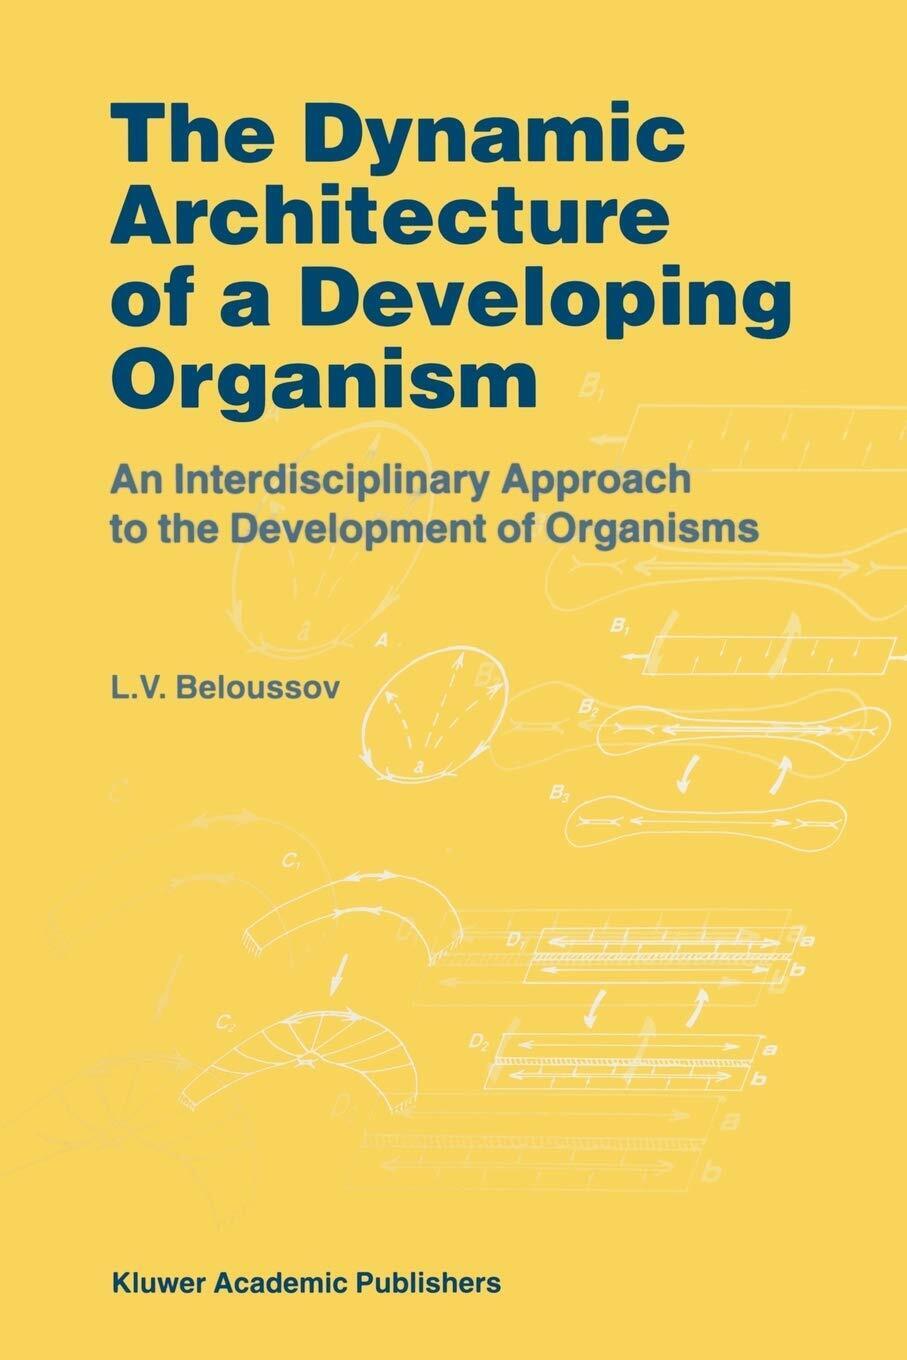 The Dynamic Architecture of a Developing Organism - L. V. Beloussov - 2010